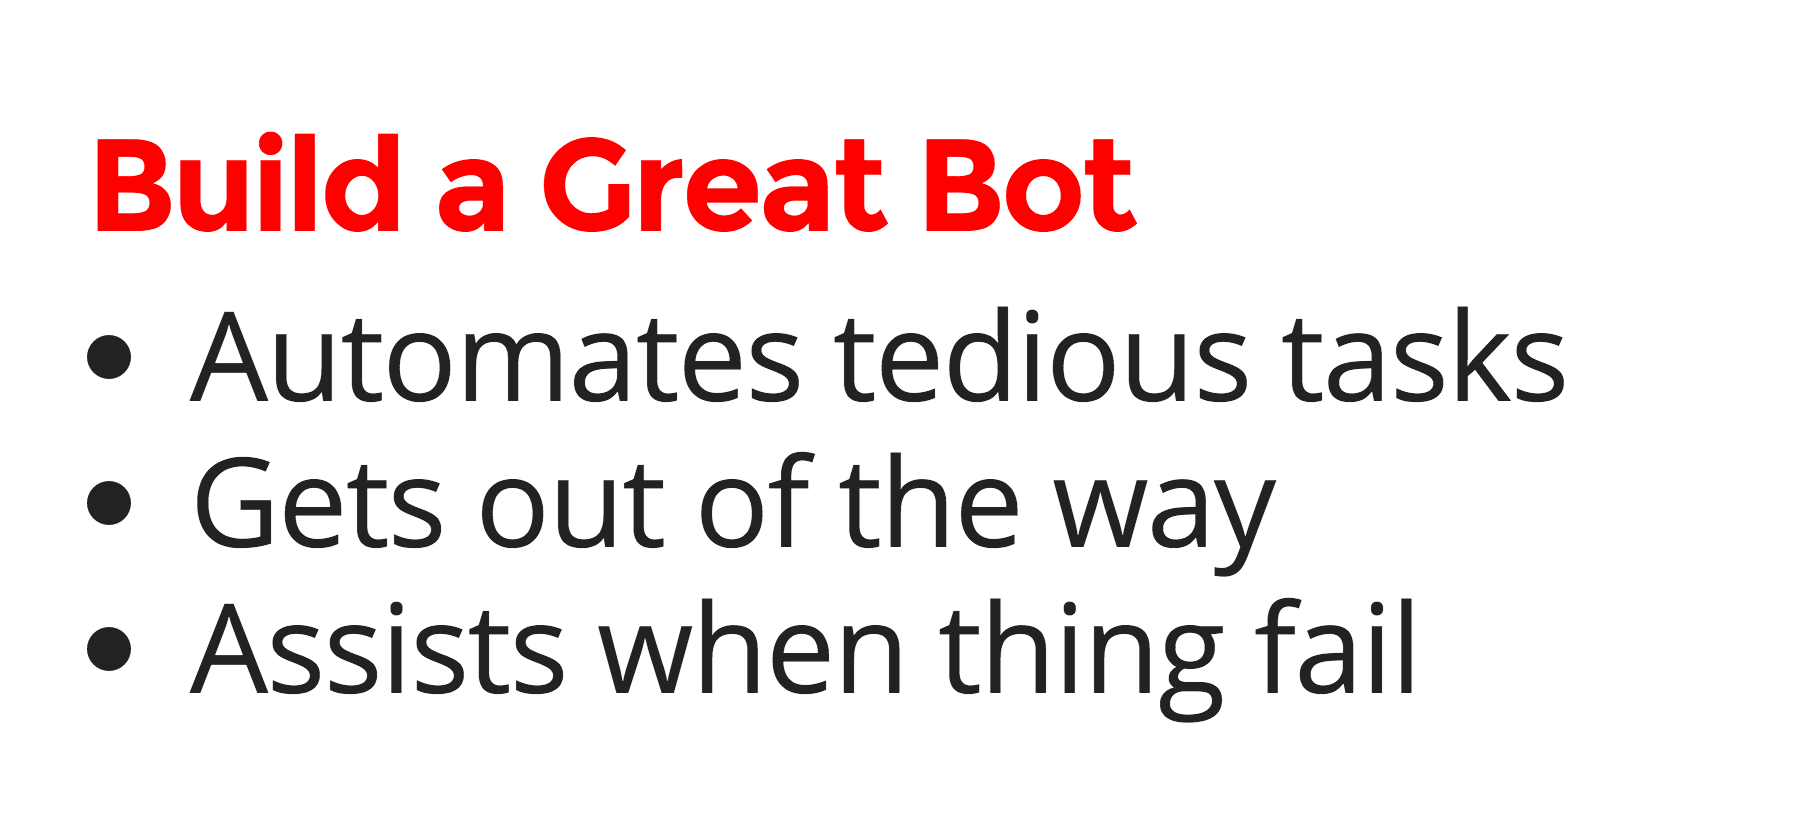 Notes for building a great bot.